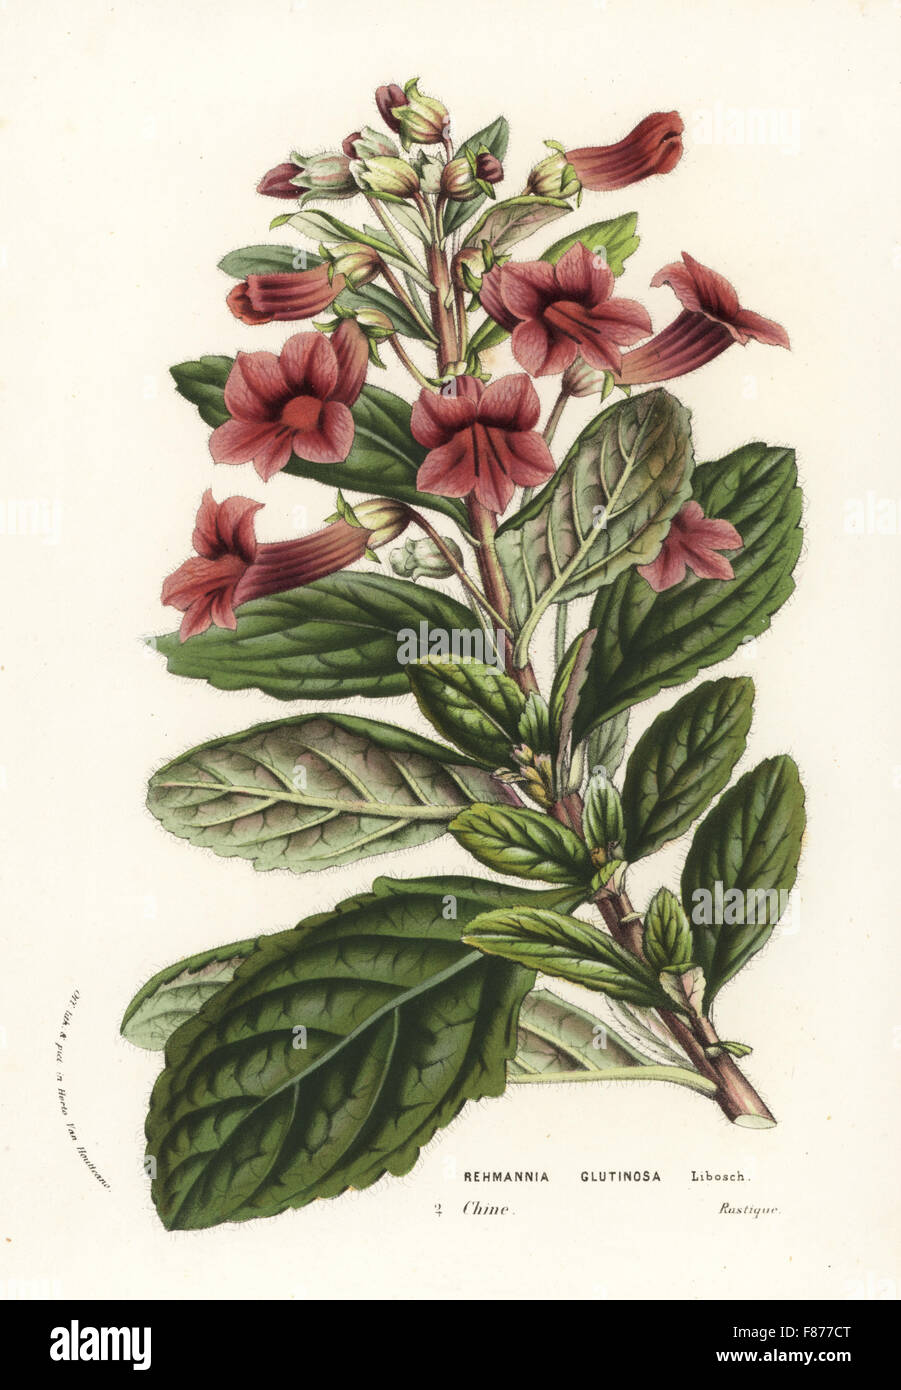 Di huang, Rehmannia glutinosa. Used in traditional Chinese herbal medicine. Handcoloured lithograph from Louis van Houtte and Charles Lemaire's Flowers of the Gardens and Hothouses of Europe, Flore des Serres et des Jardins de l'Europe, Ghent, Belgium, 1856. Stock Photo